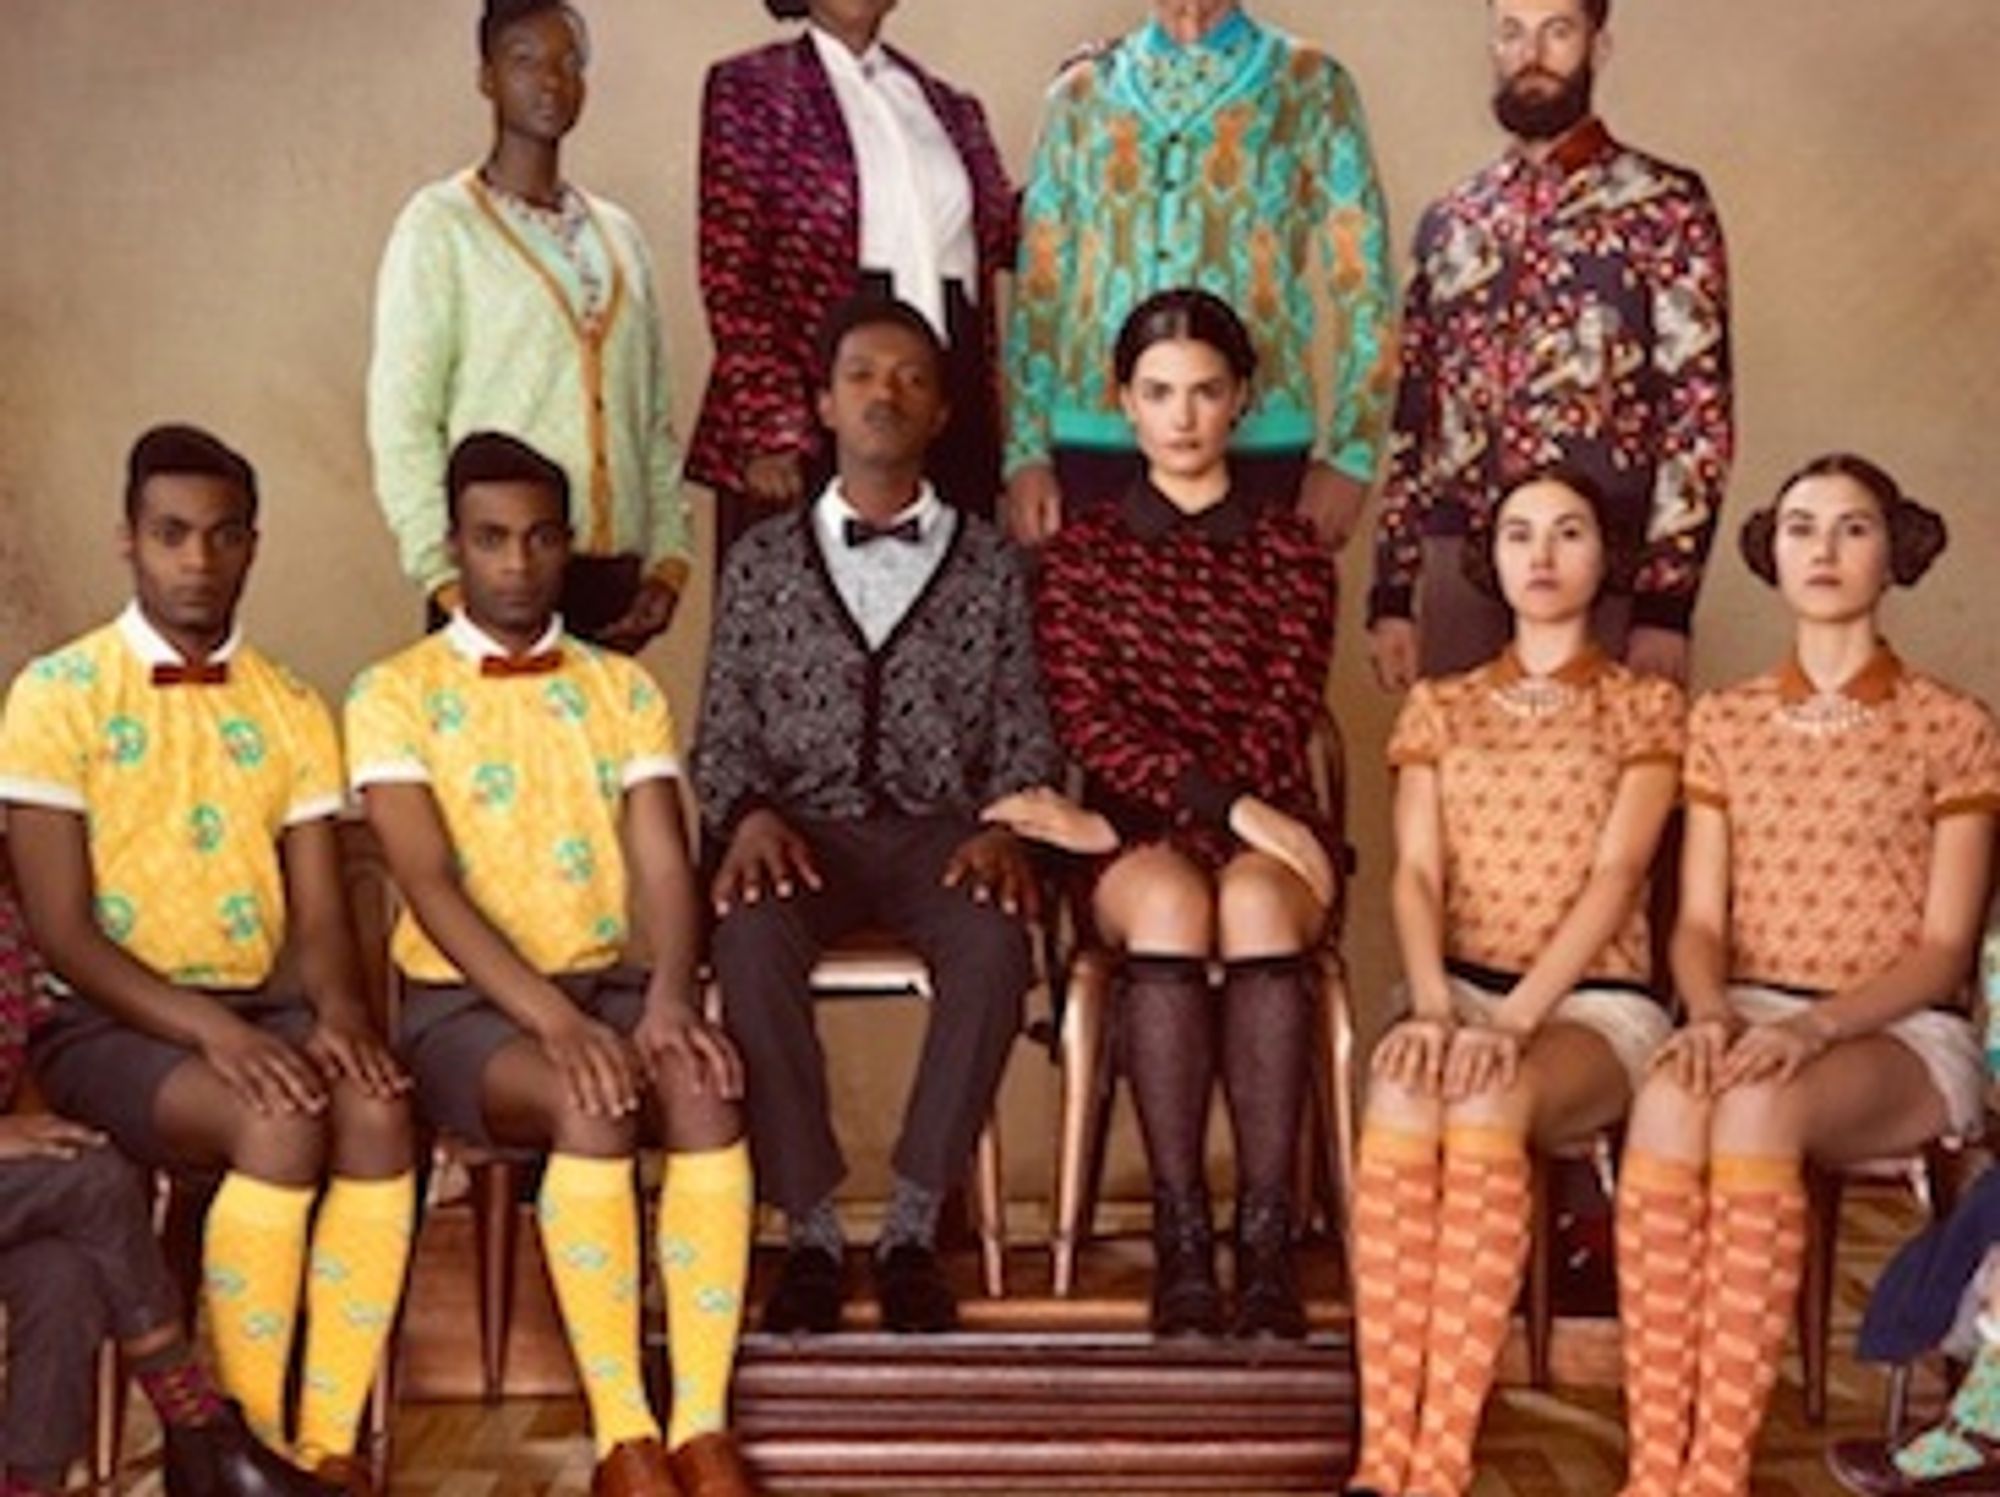 With Mosaert, Belgian Musician Stromae is Building a Fashion Brand